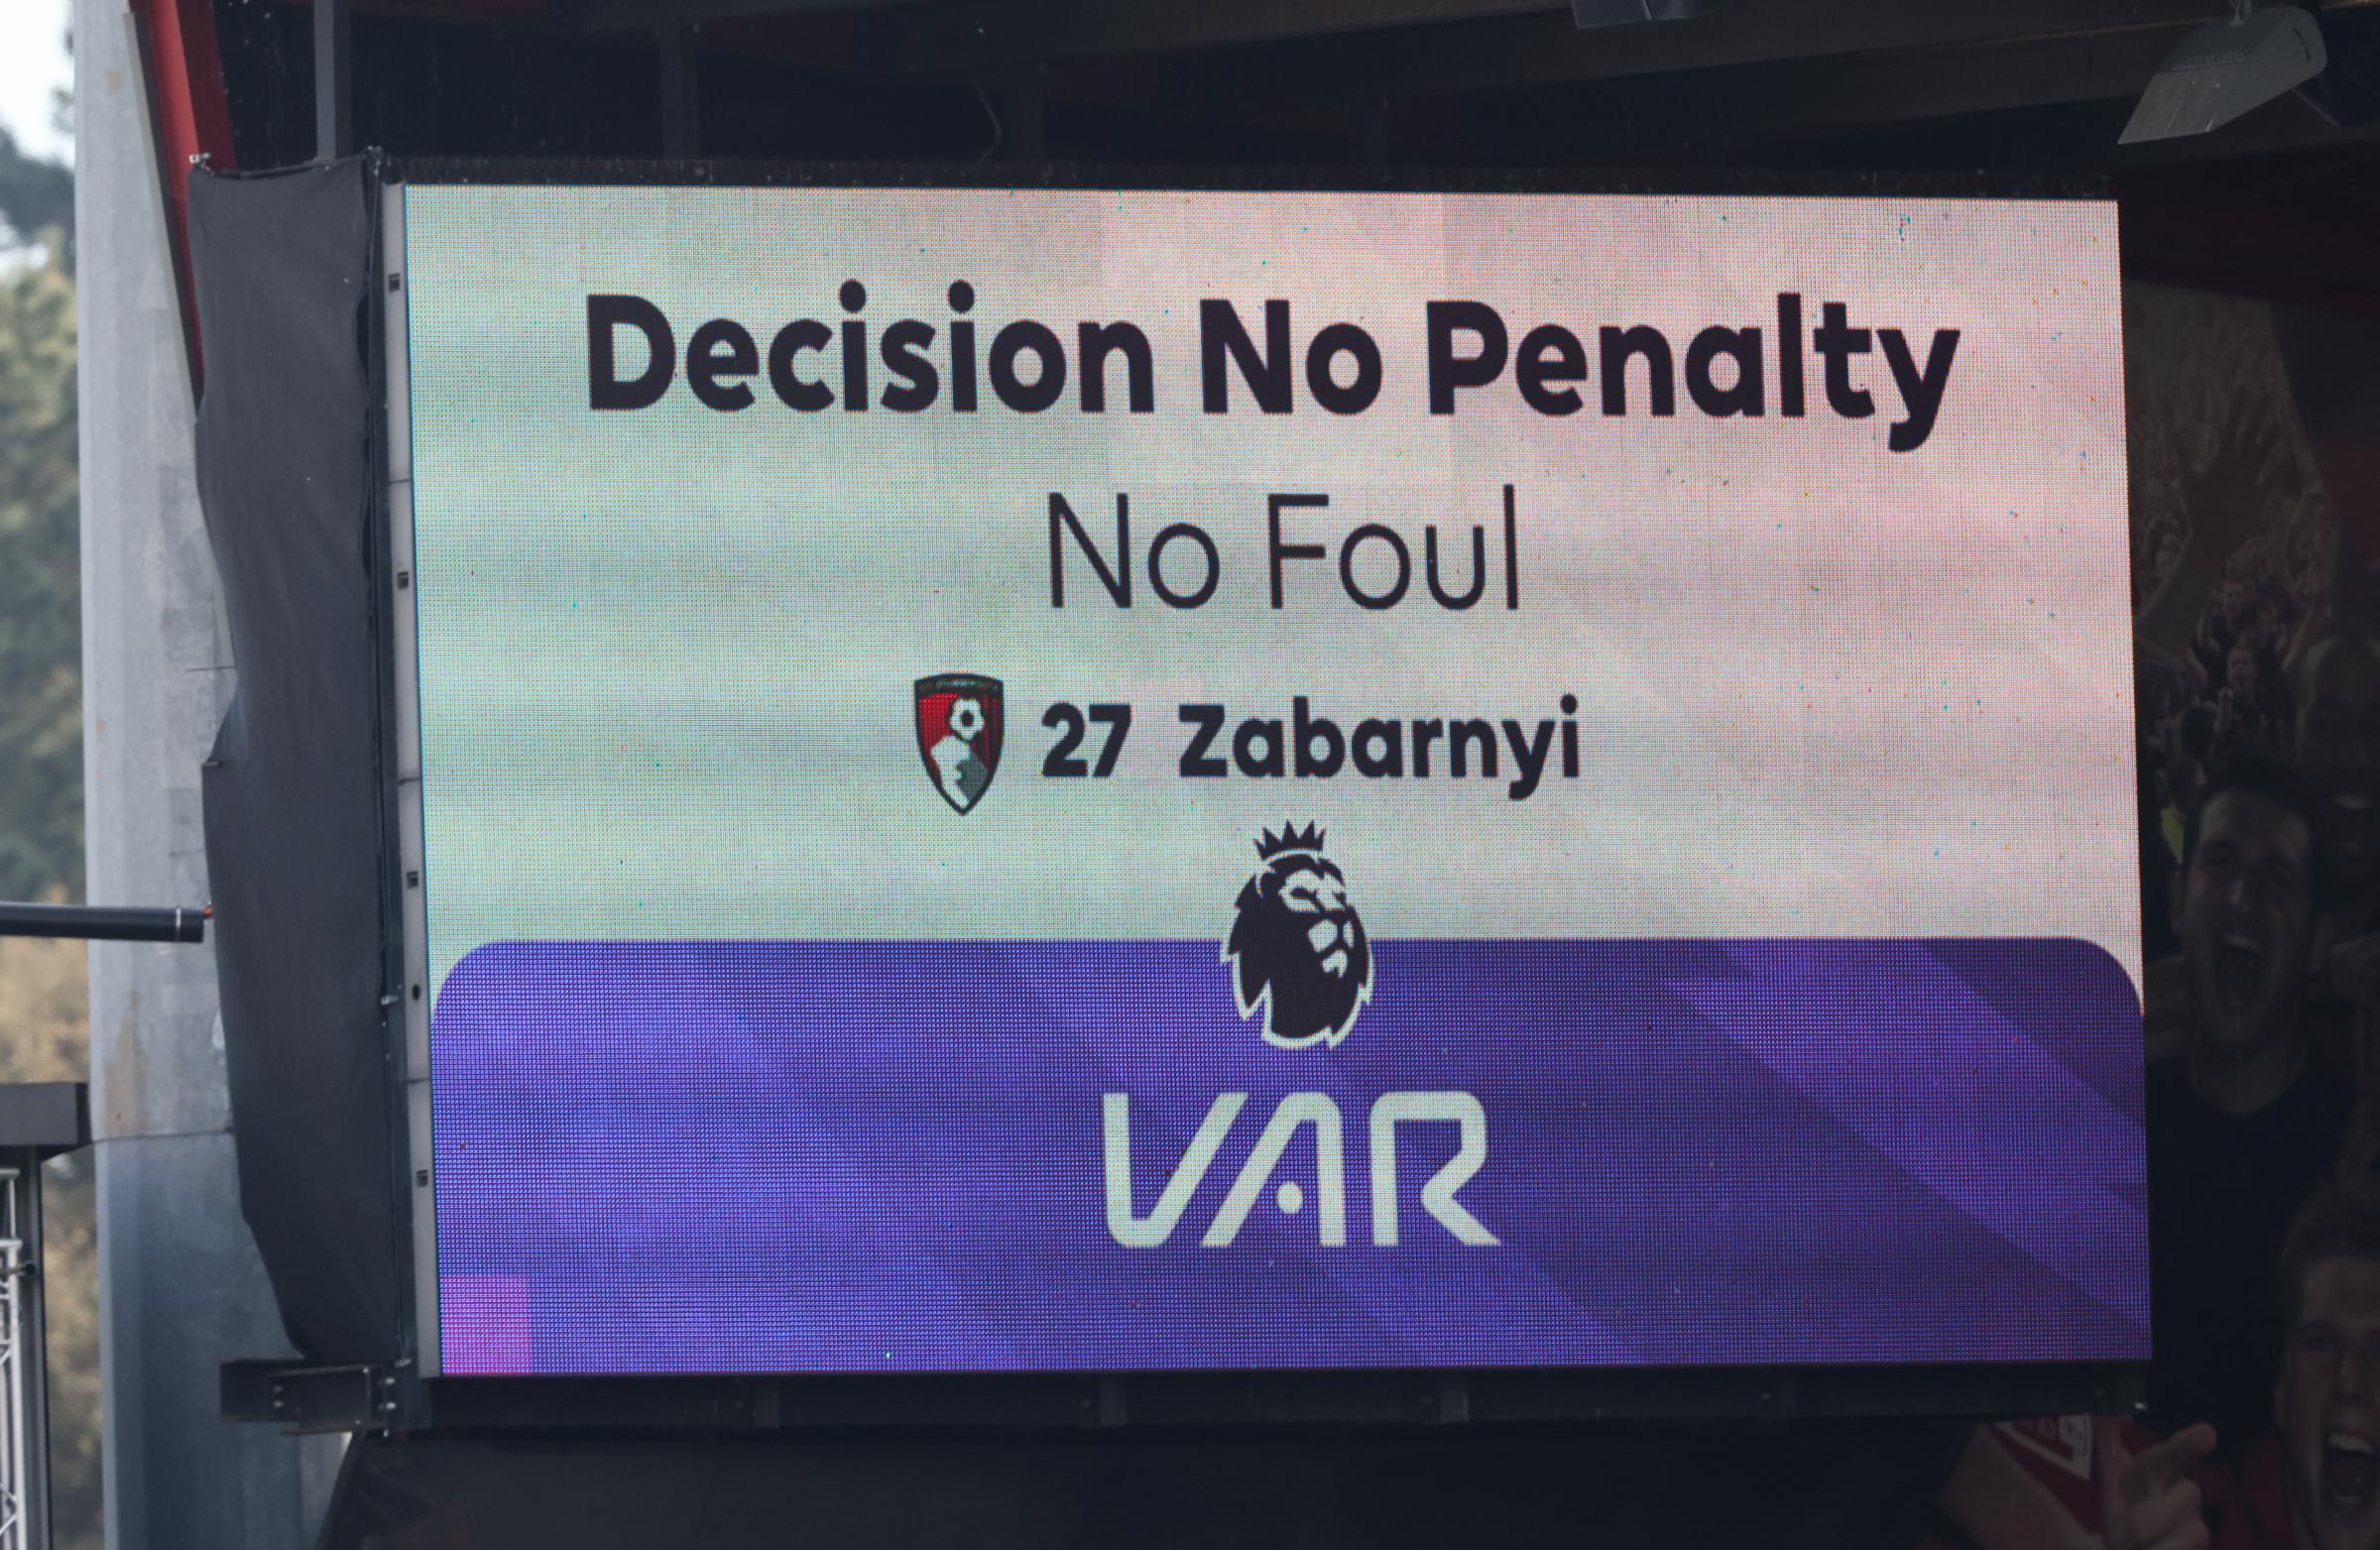 Premier League clubs set for summer vote on whether to scrap VAR